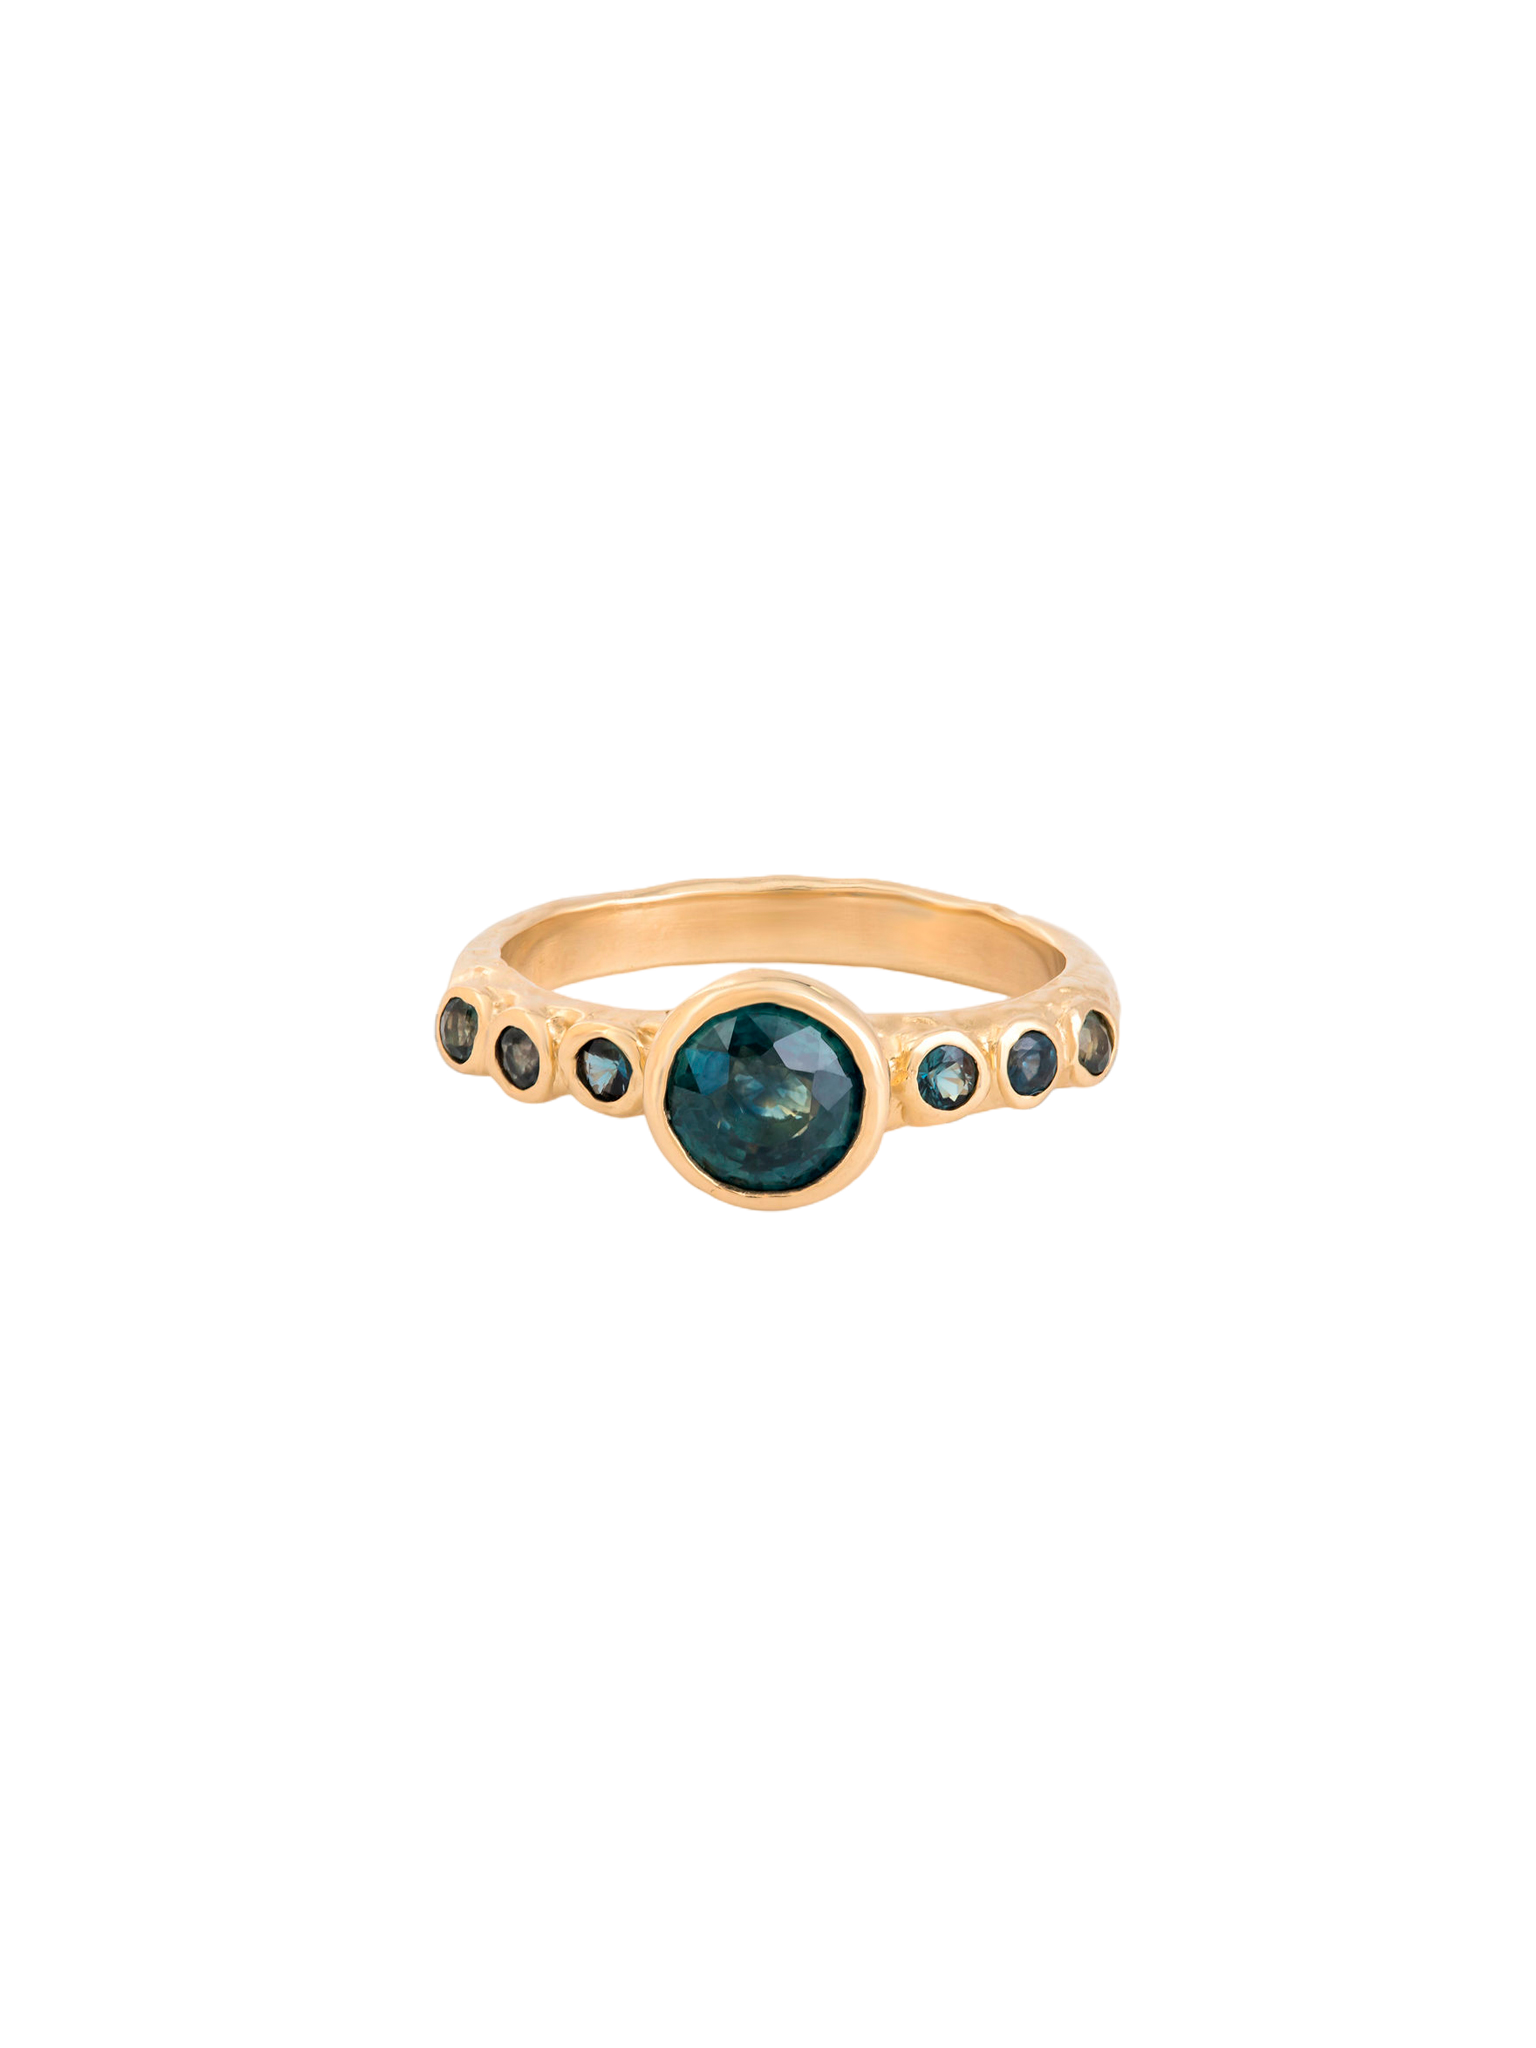 Eve montana and teal sapphire ring